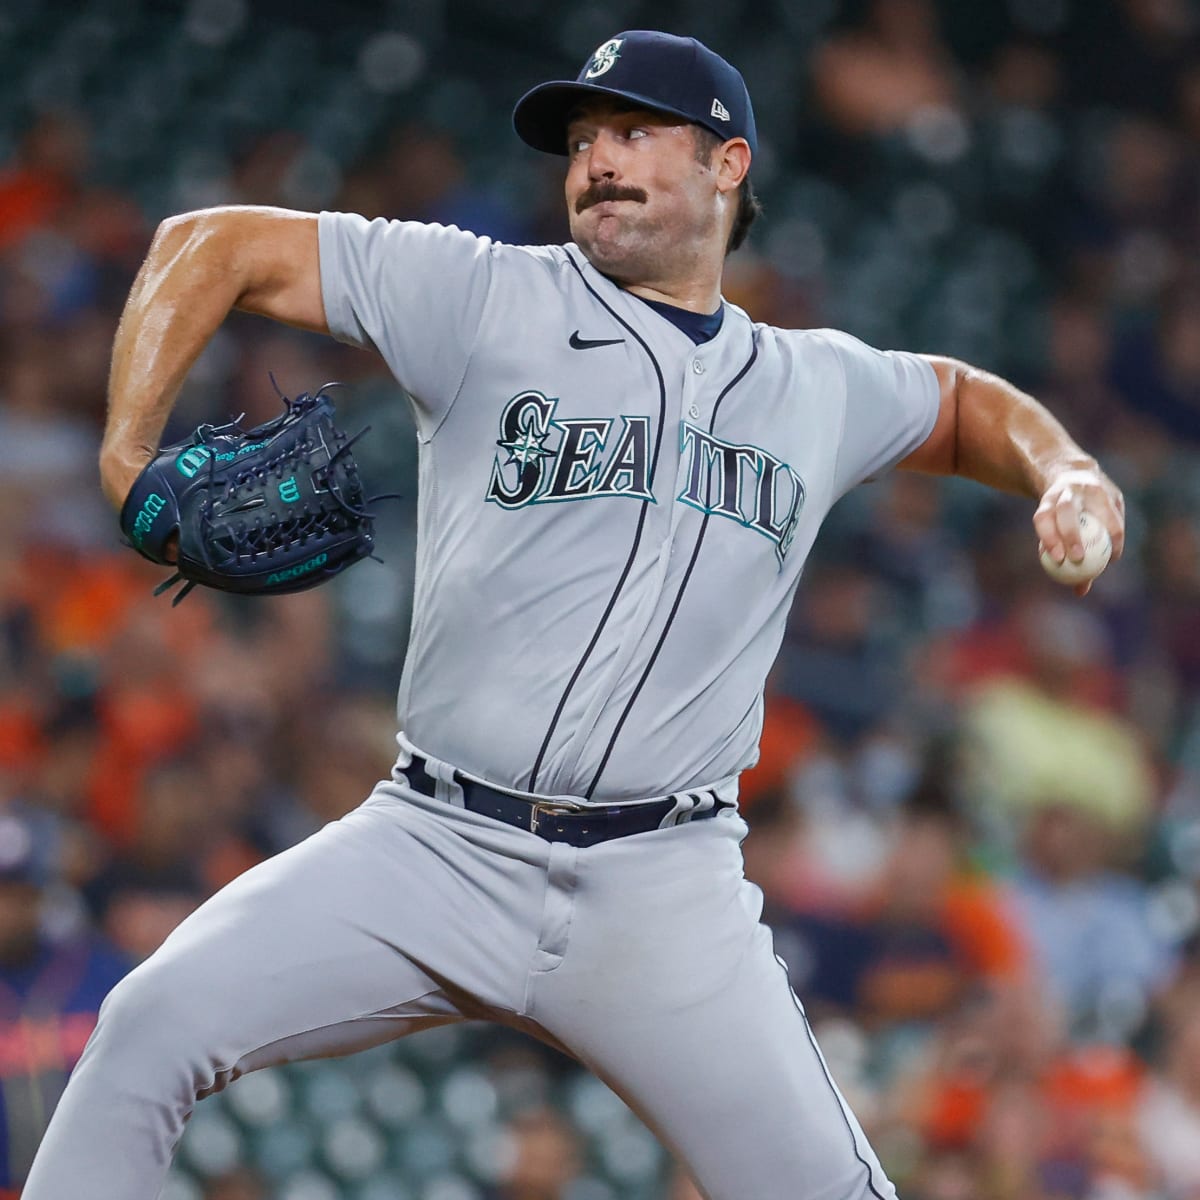 Robbie Ray Doesn't Need to be That Robbie Ray for Mariners